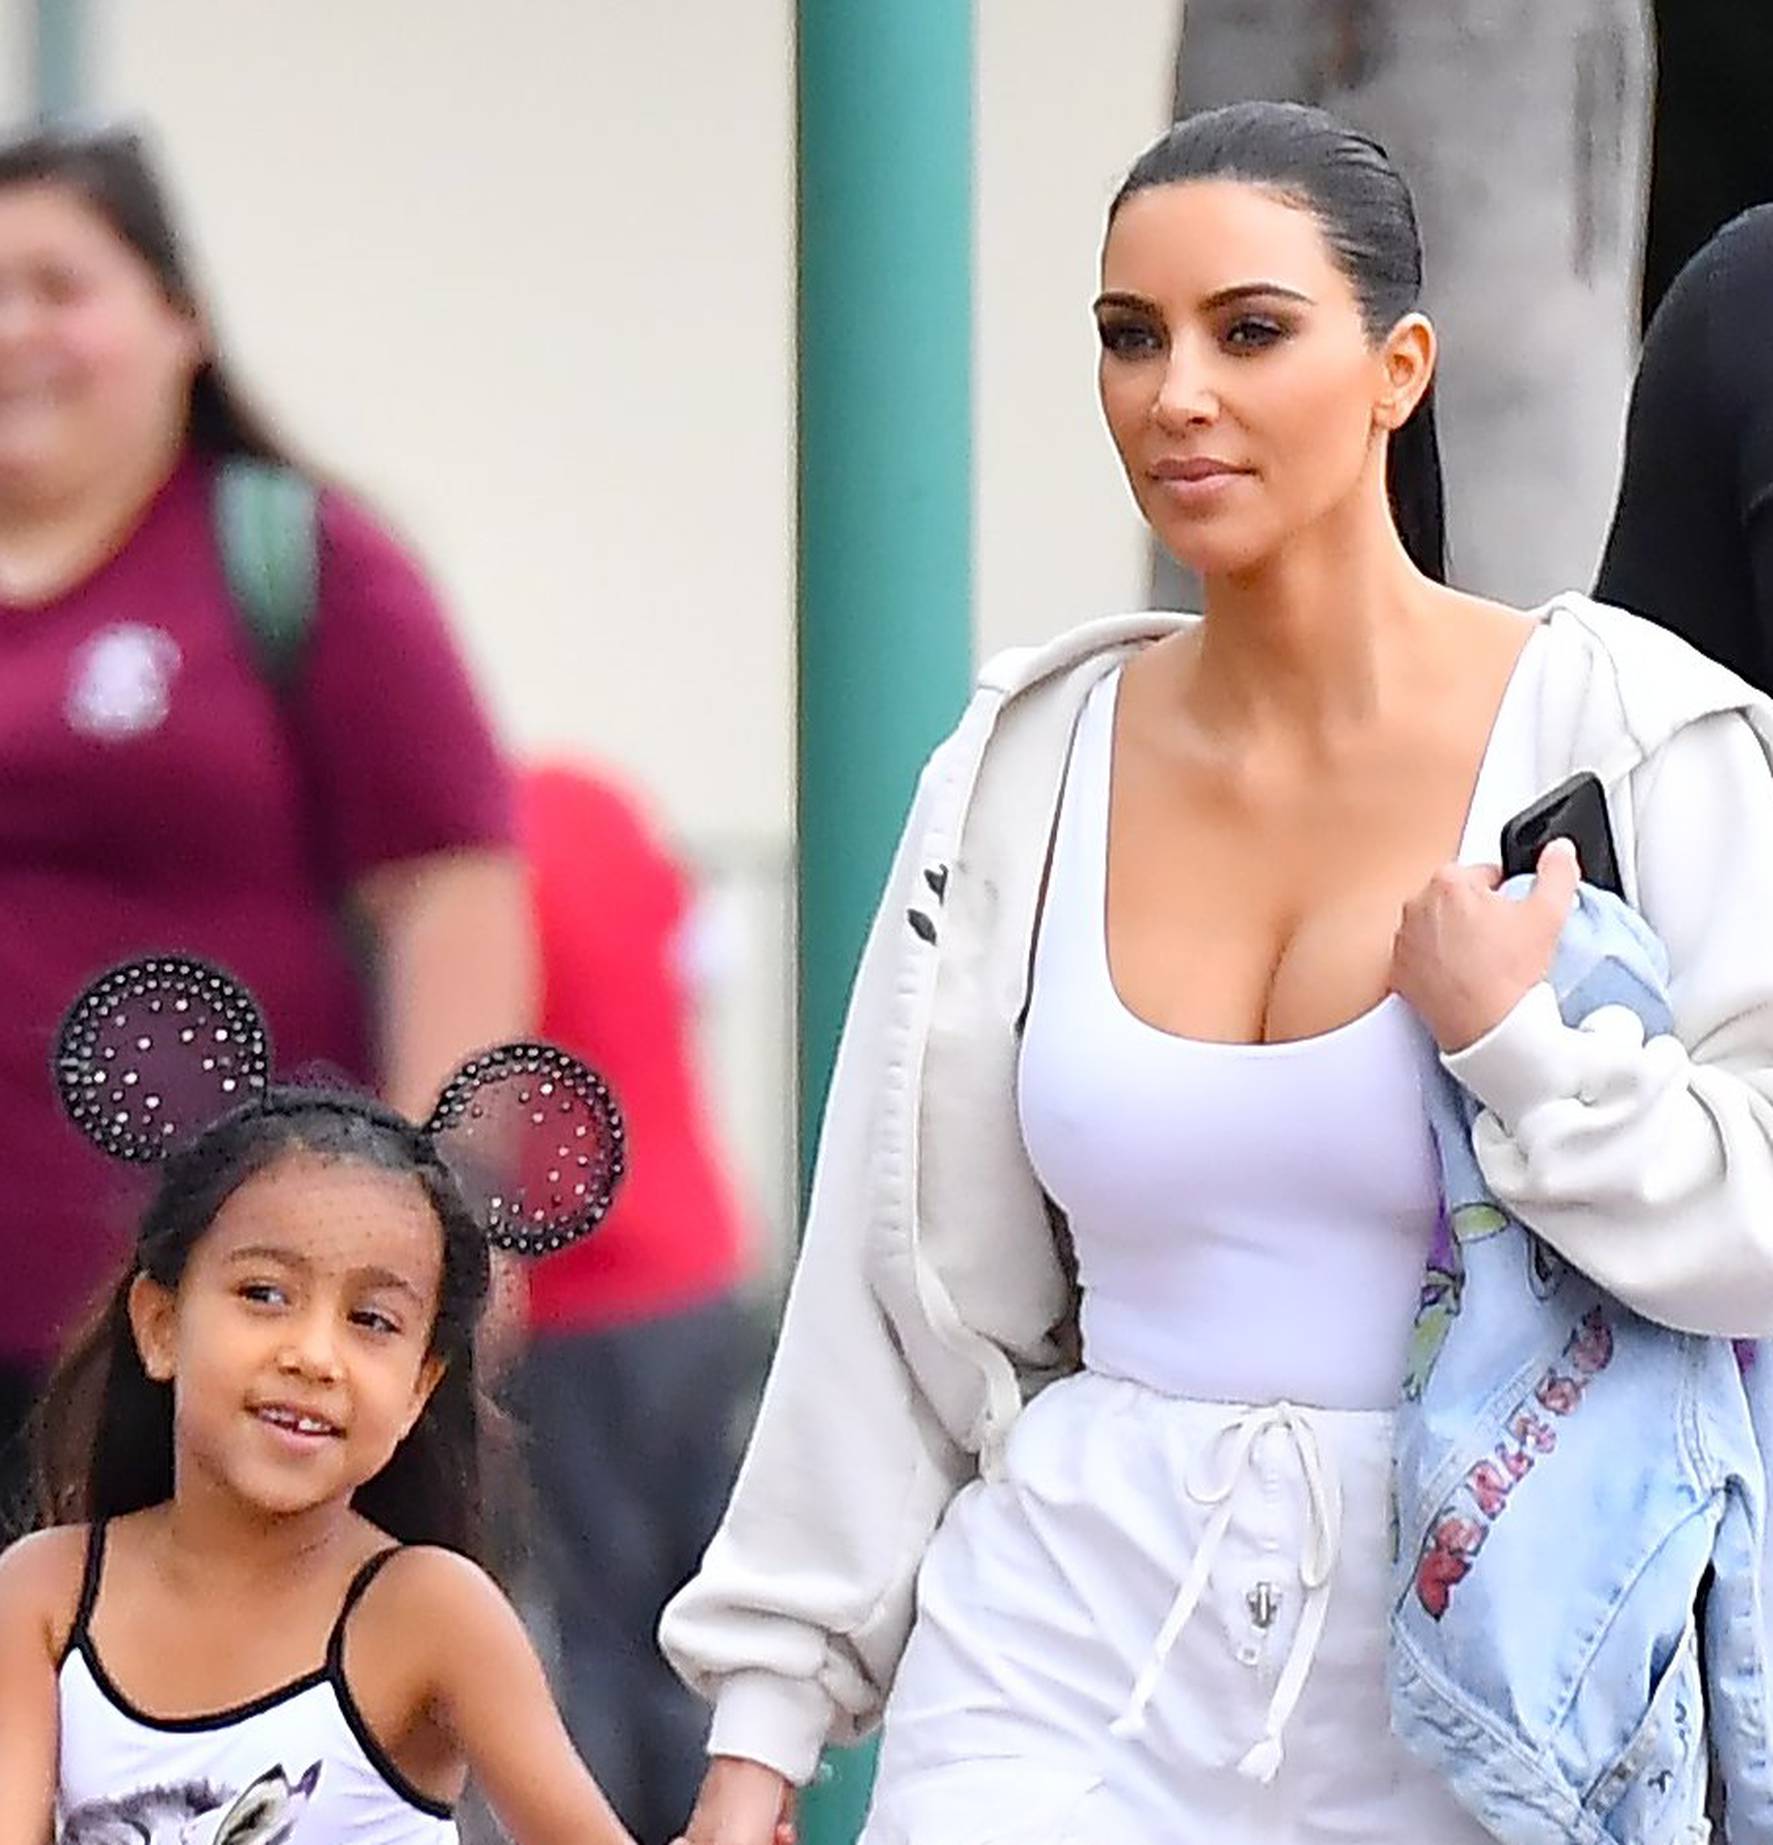 ** PREMIUM EXCLUSIVE RATES APPLY ** Kim Kardashian and her daughter North West have a fun day at Disneyland with friends